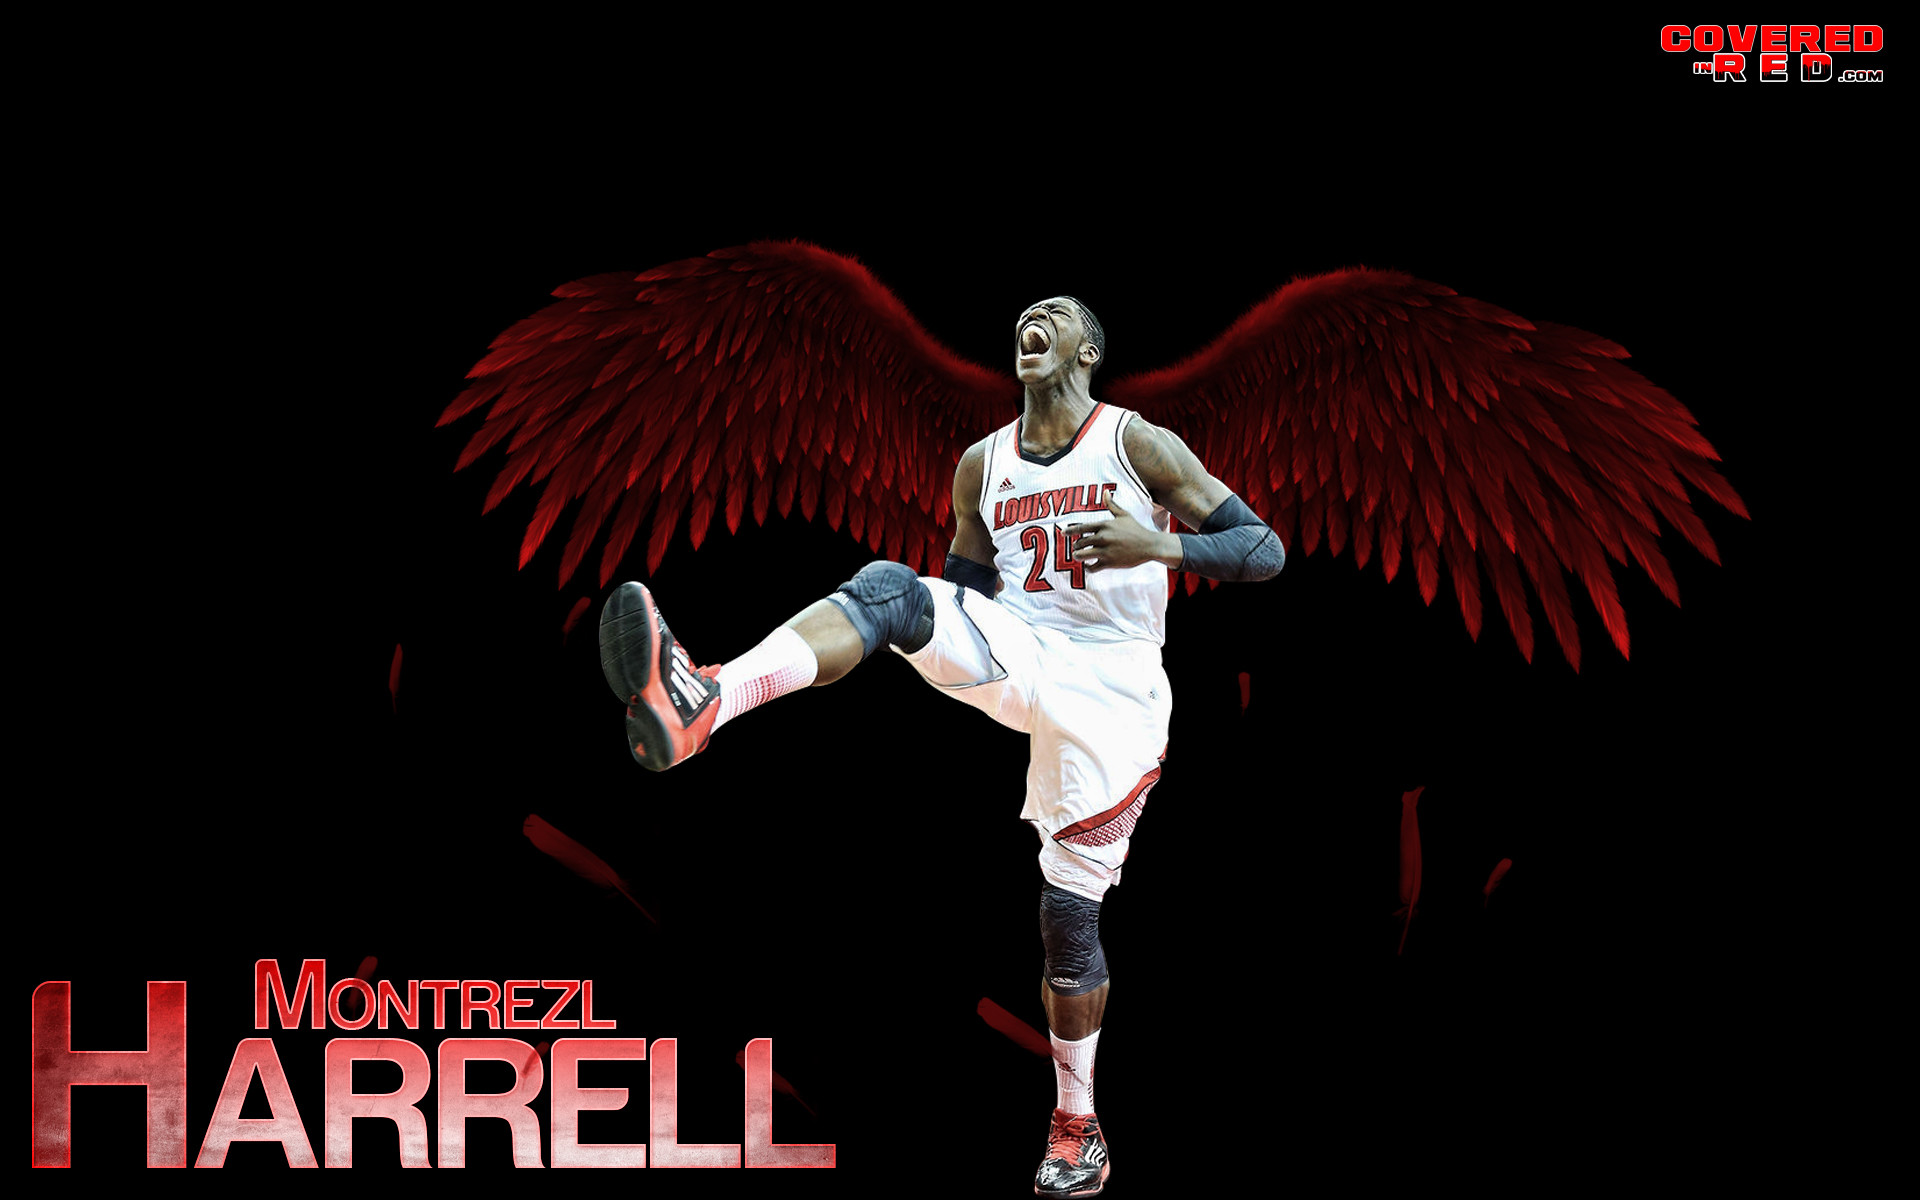 1920x1200 Louisville Cardinals Basketball Wallpaper submited images.